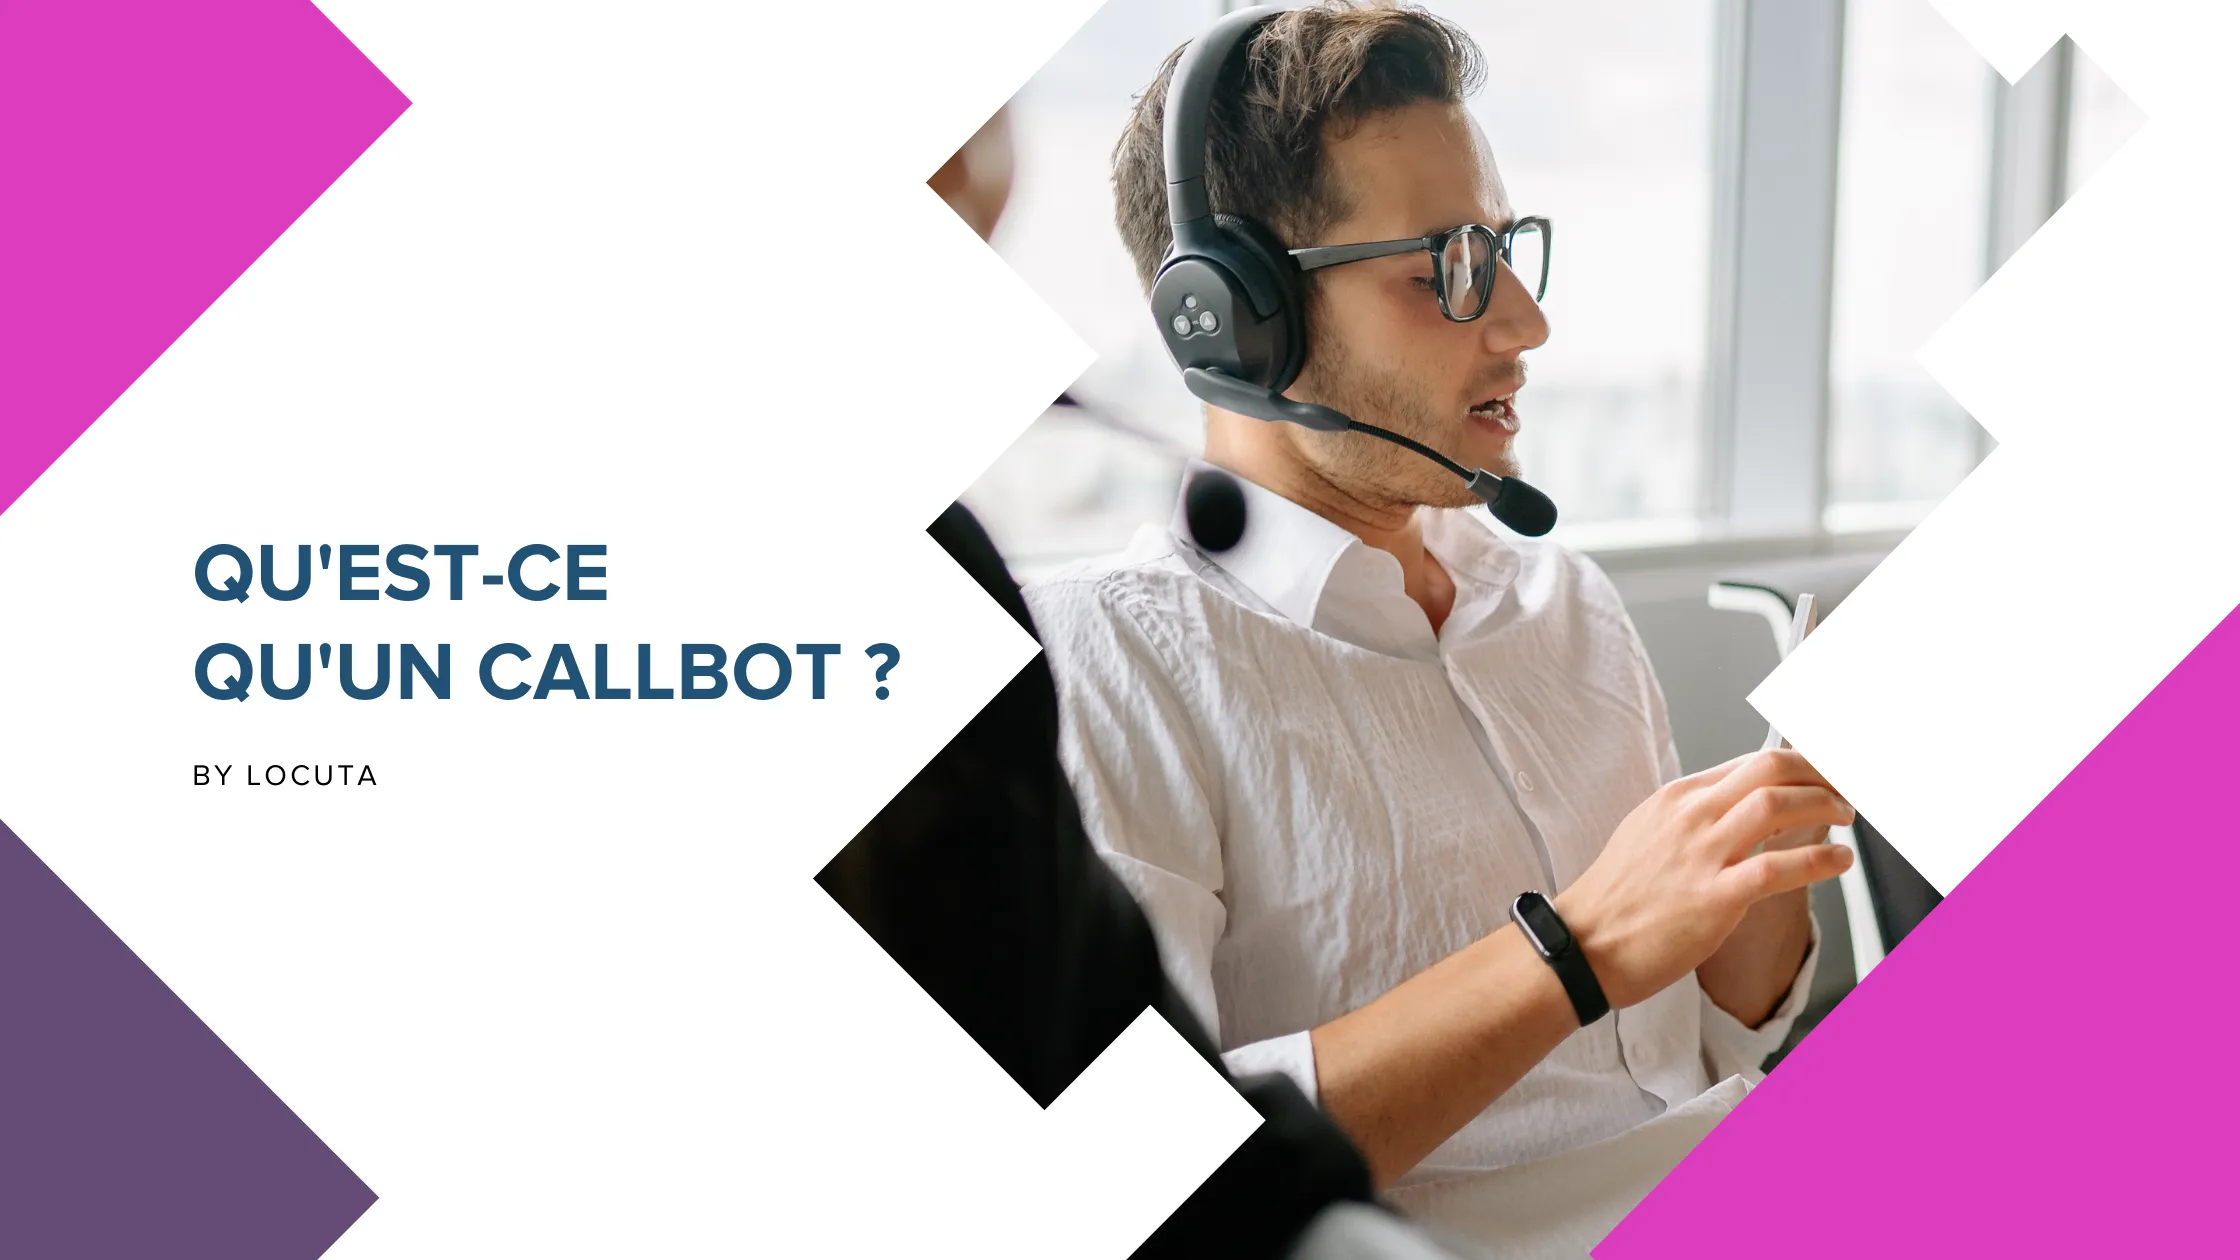 we explain what a Callbot is